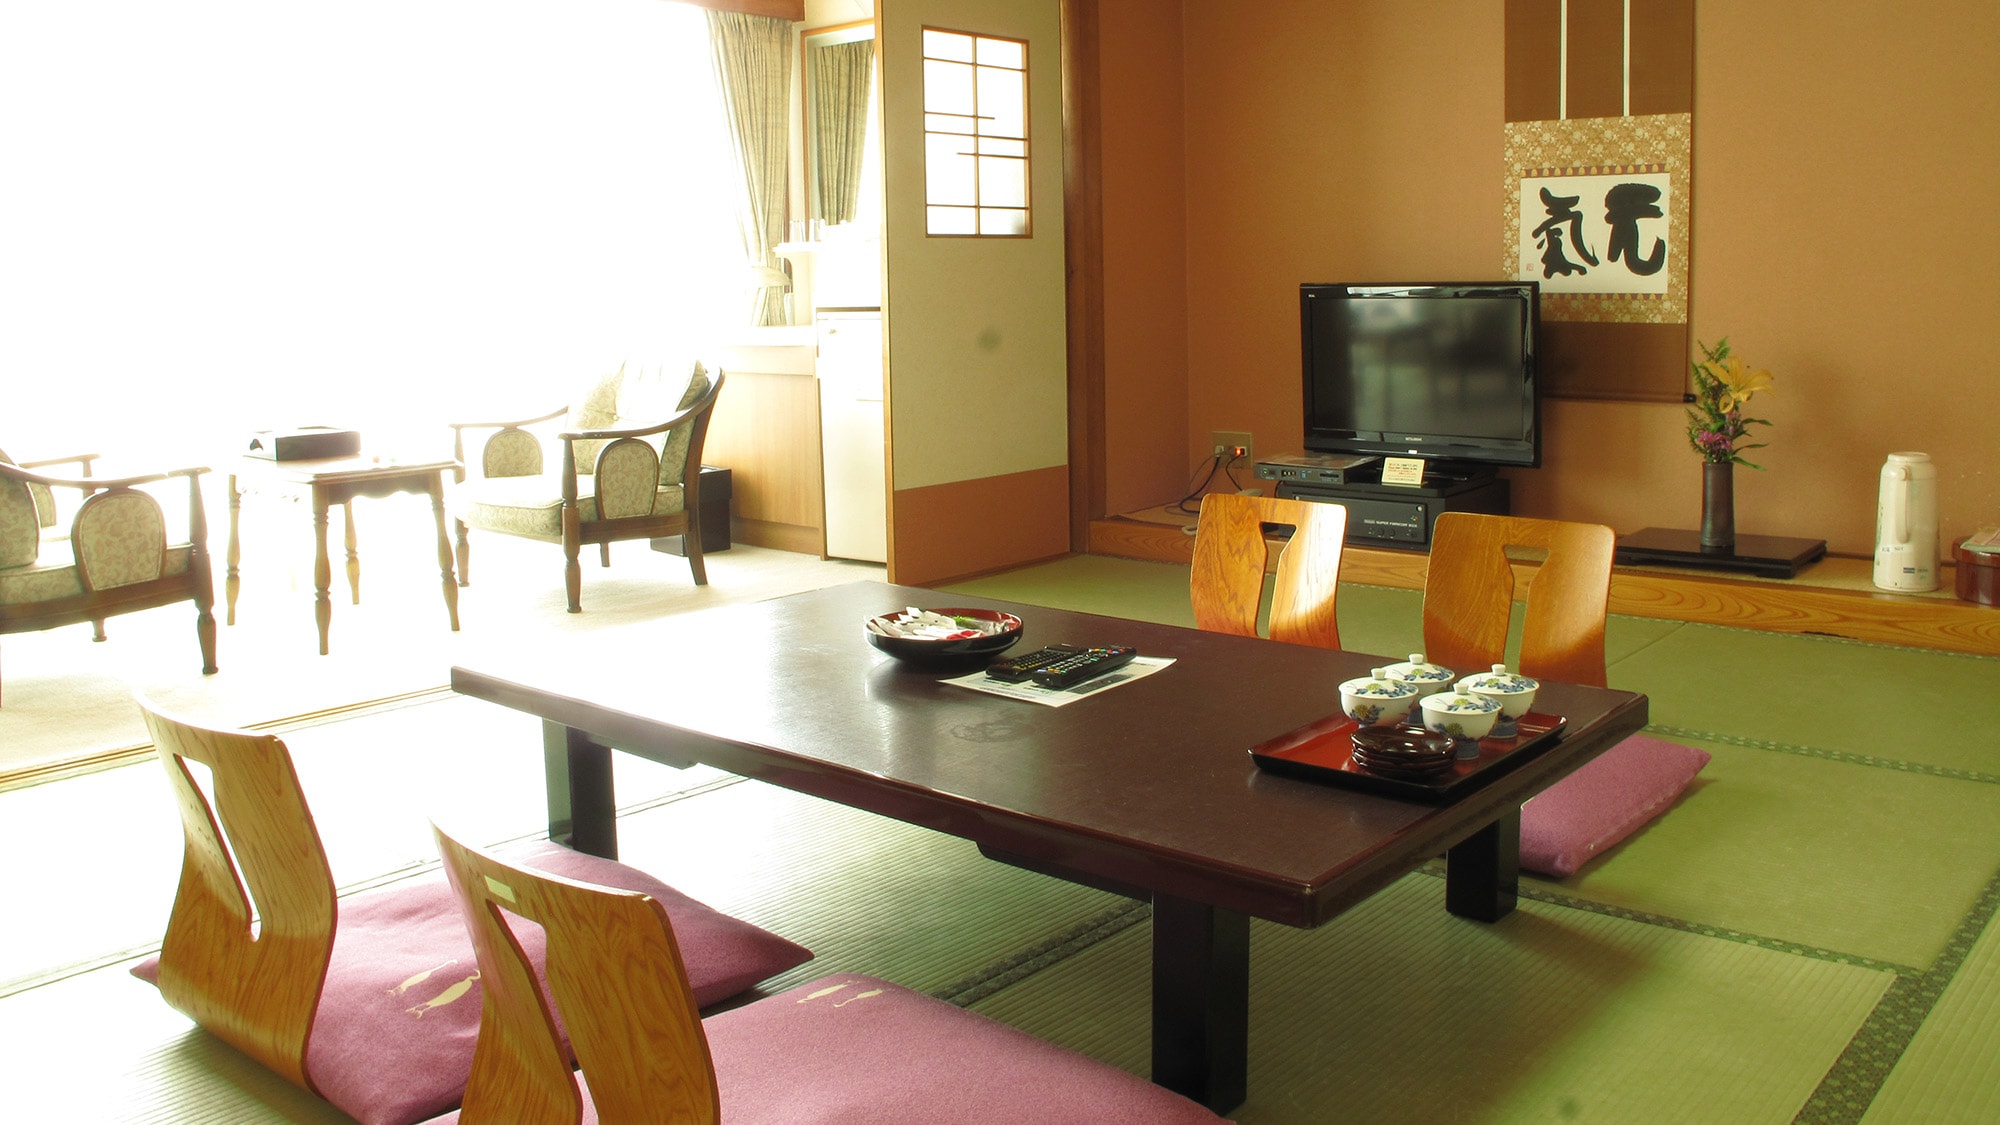 An example of a Japanese-style room with 10 tatami mats